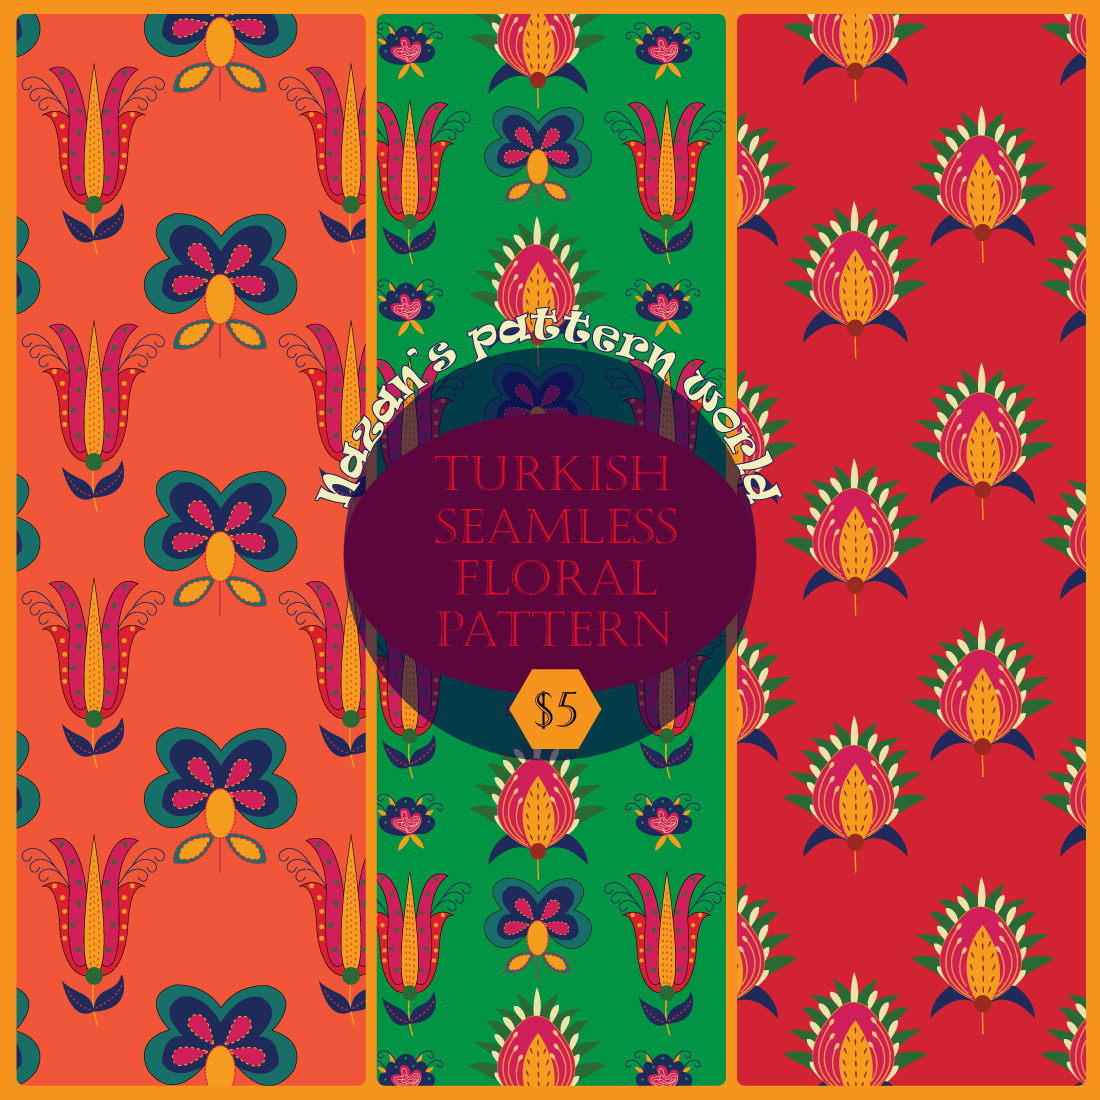 Turkish Seamless Floral Pattern cover image.